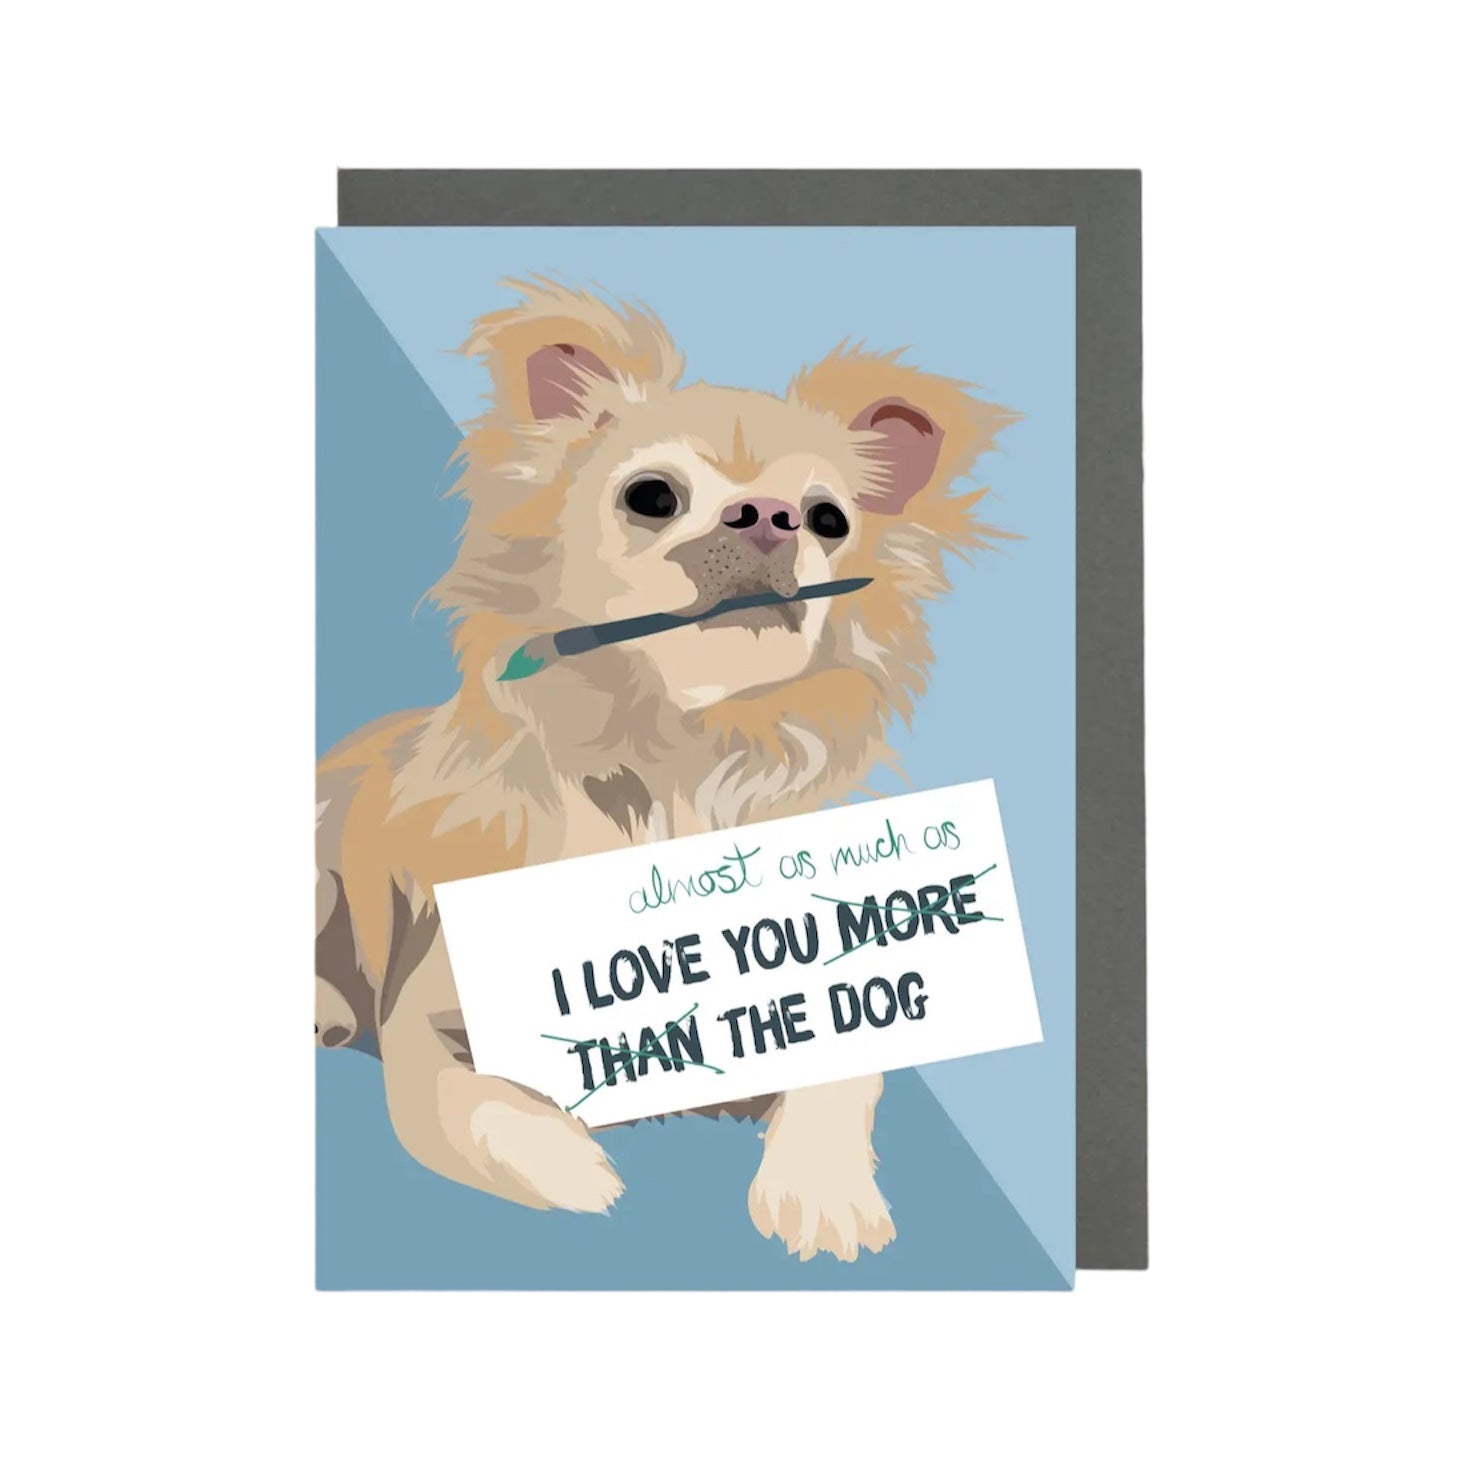 I Love You Almost As Much As the Dog Chihuahua Card